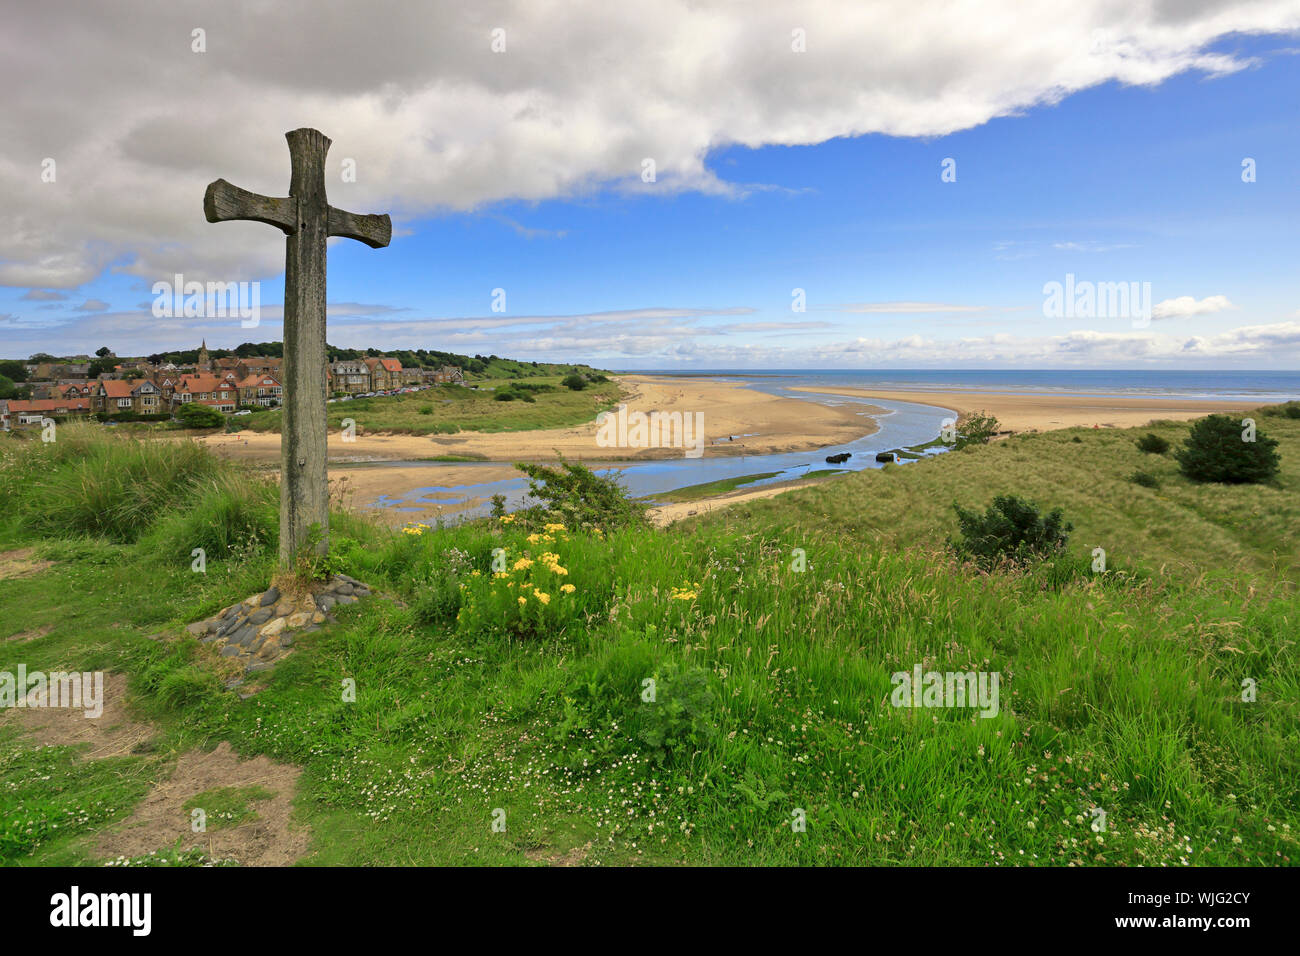 St Cuthberts Cross on Church Hill overlooking the River Aln estuary and Alnmouth, Northumberland, England, UK. Stock Photo